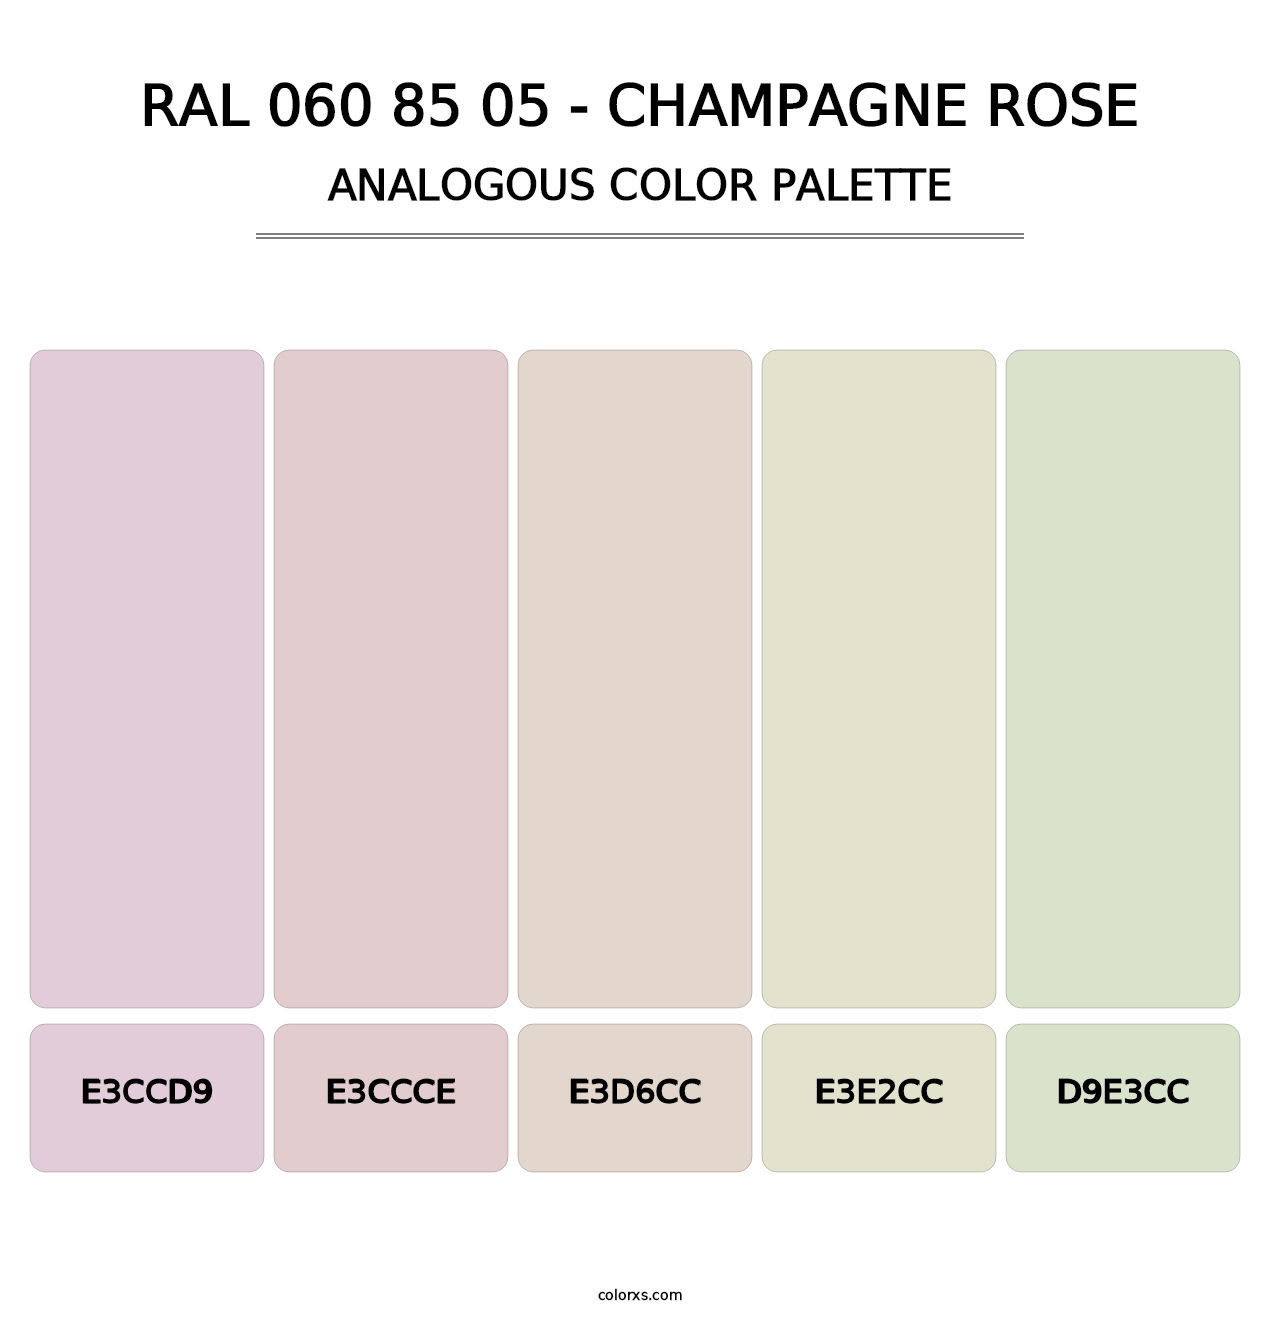 RAL 060 85 05 - Champagne Rose - Analogous Color Palette